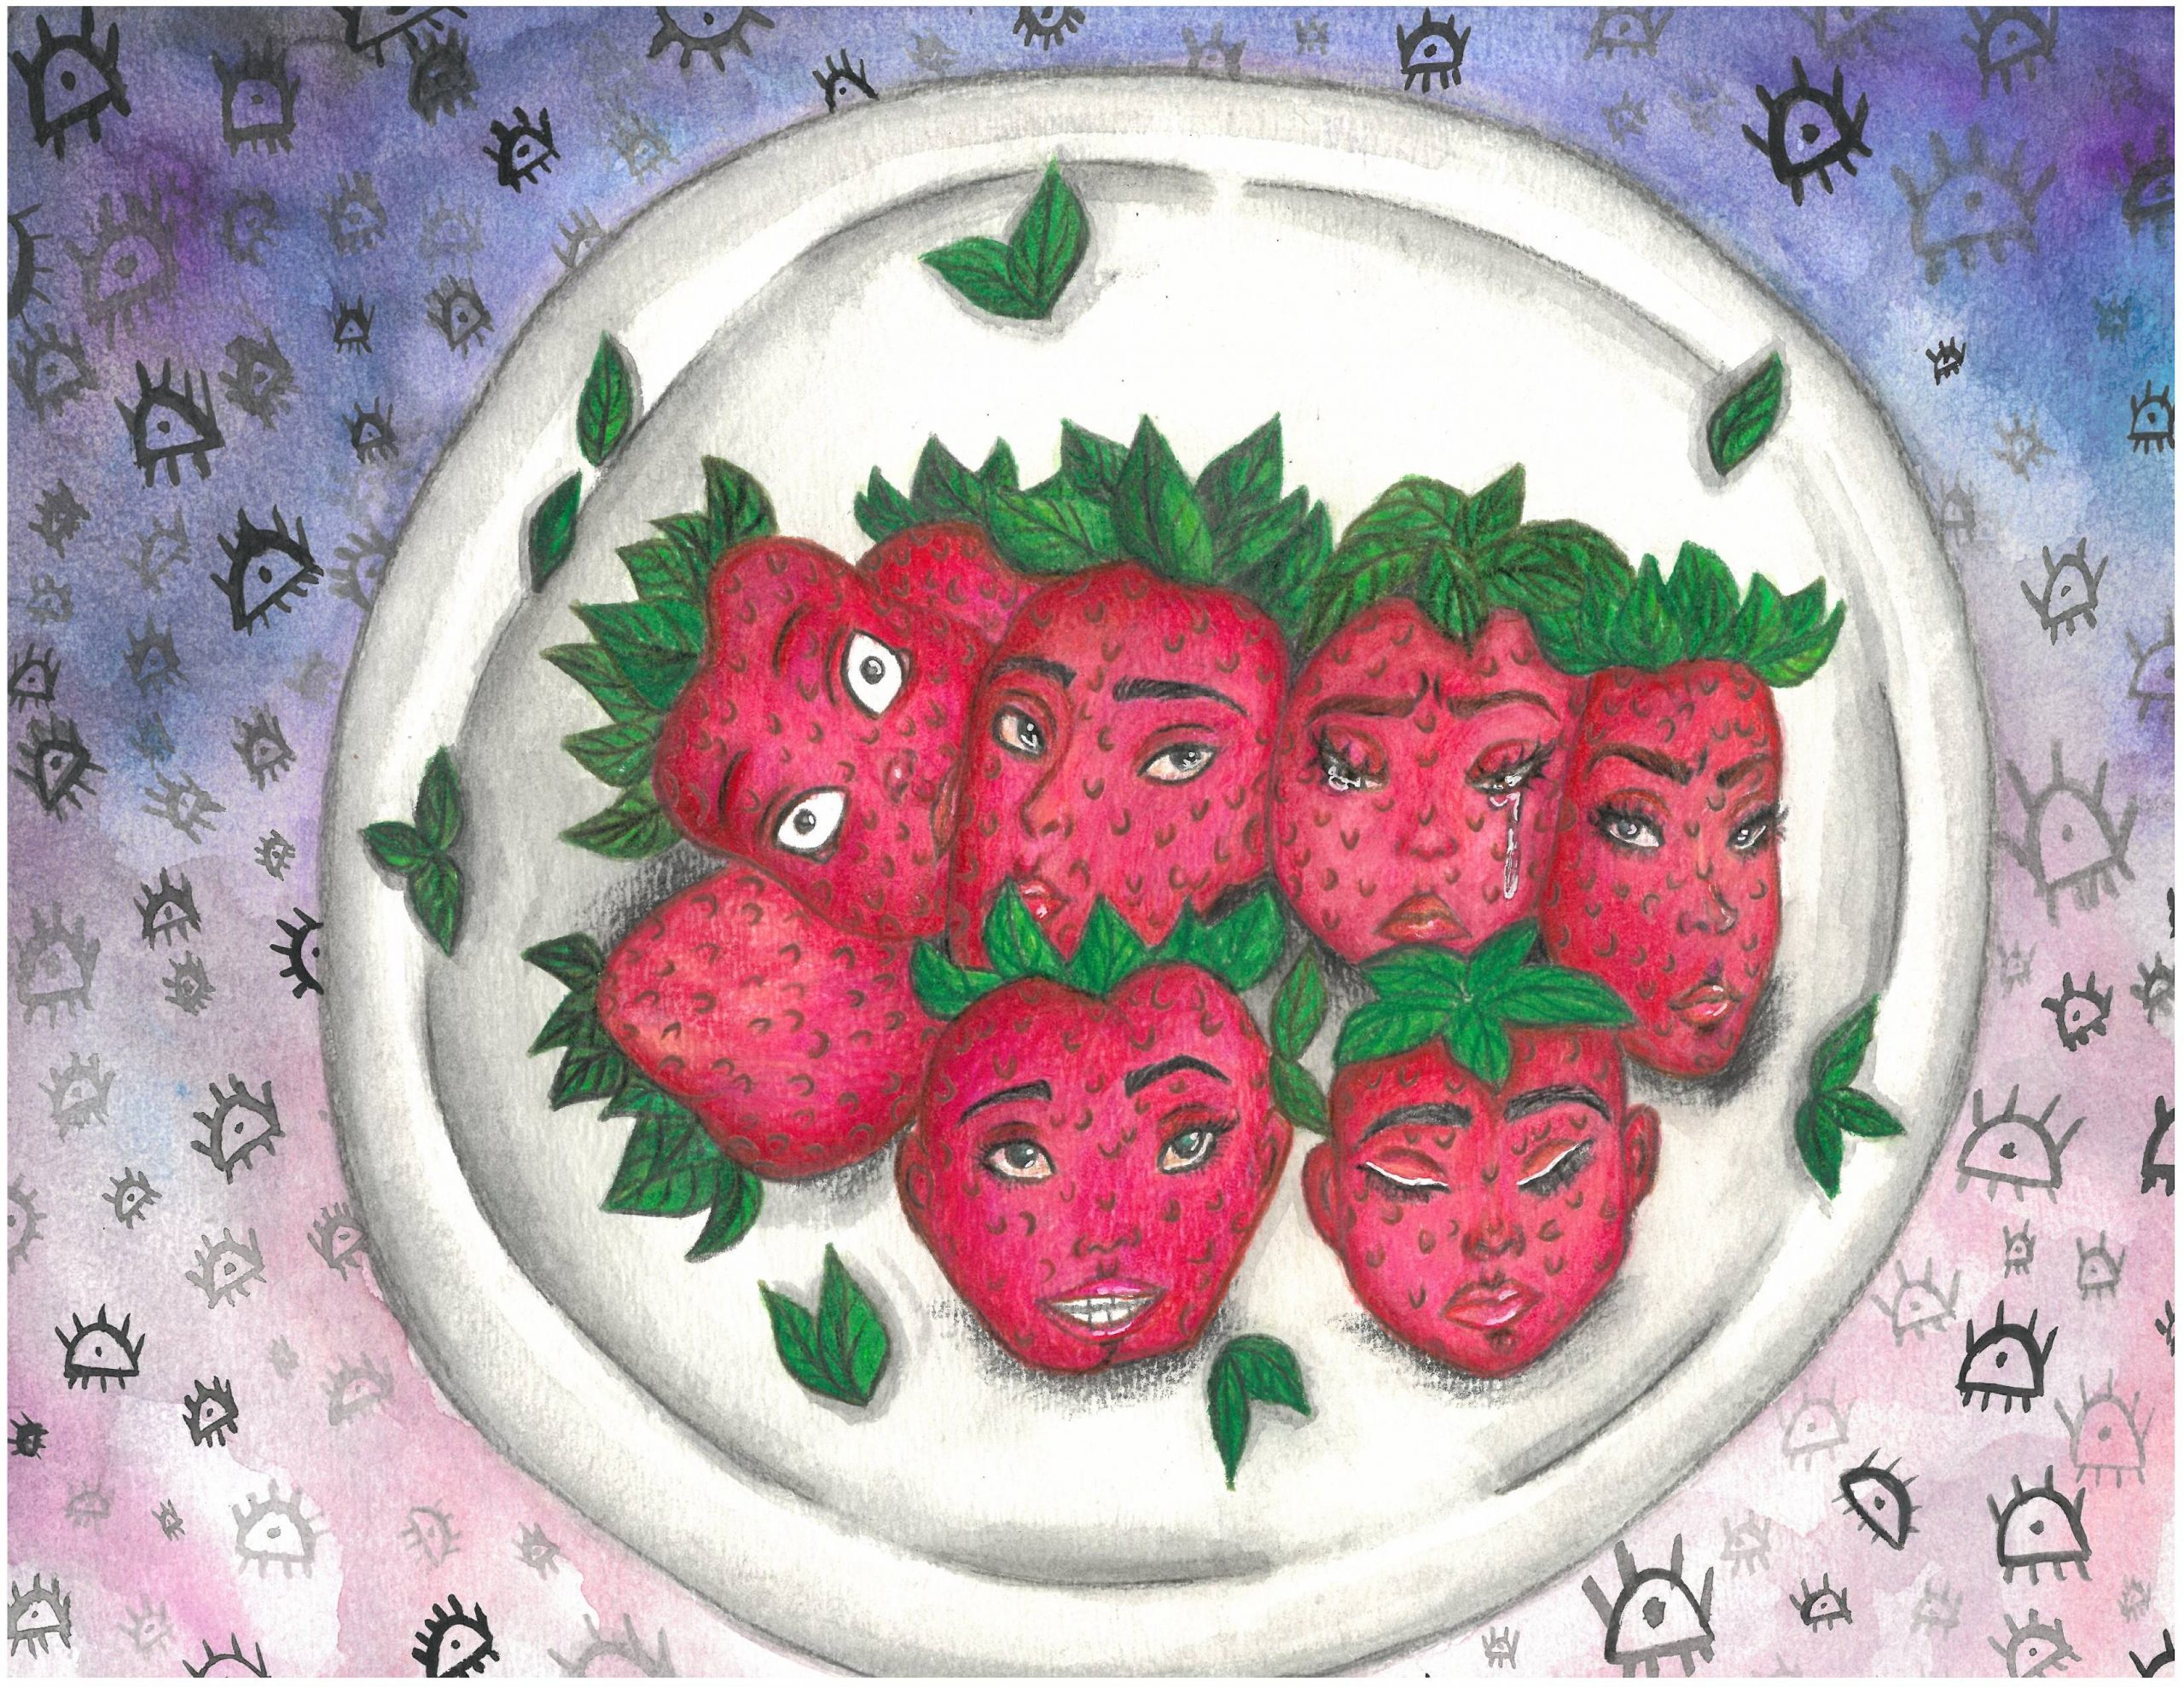 Strawberries with faces on a plate